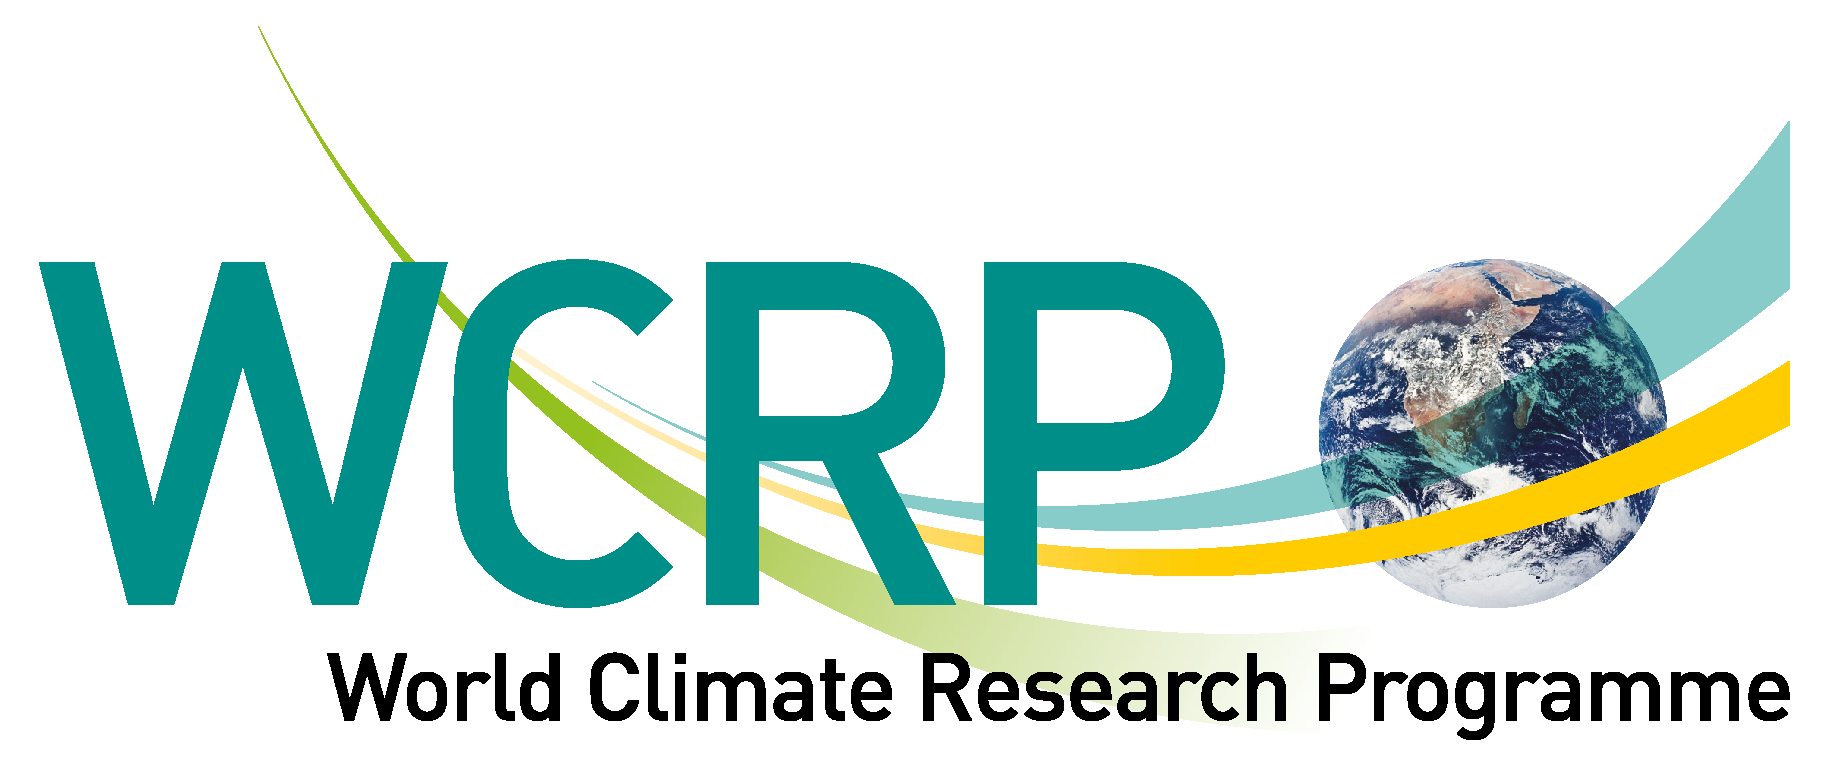 World Climate Research Program